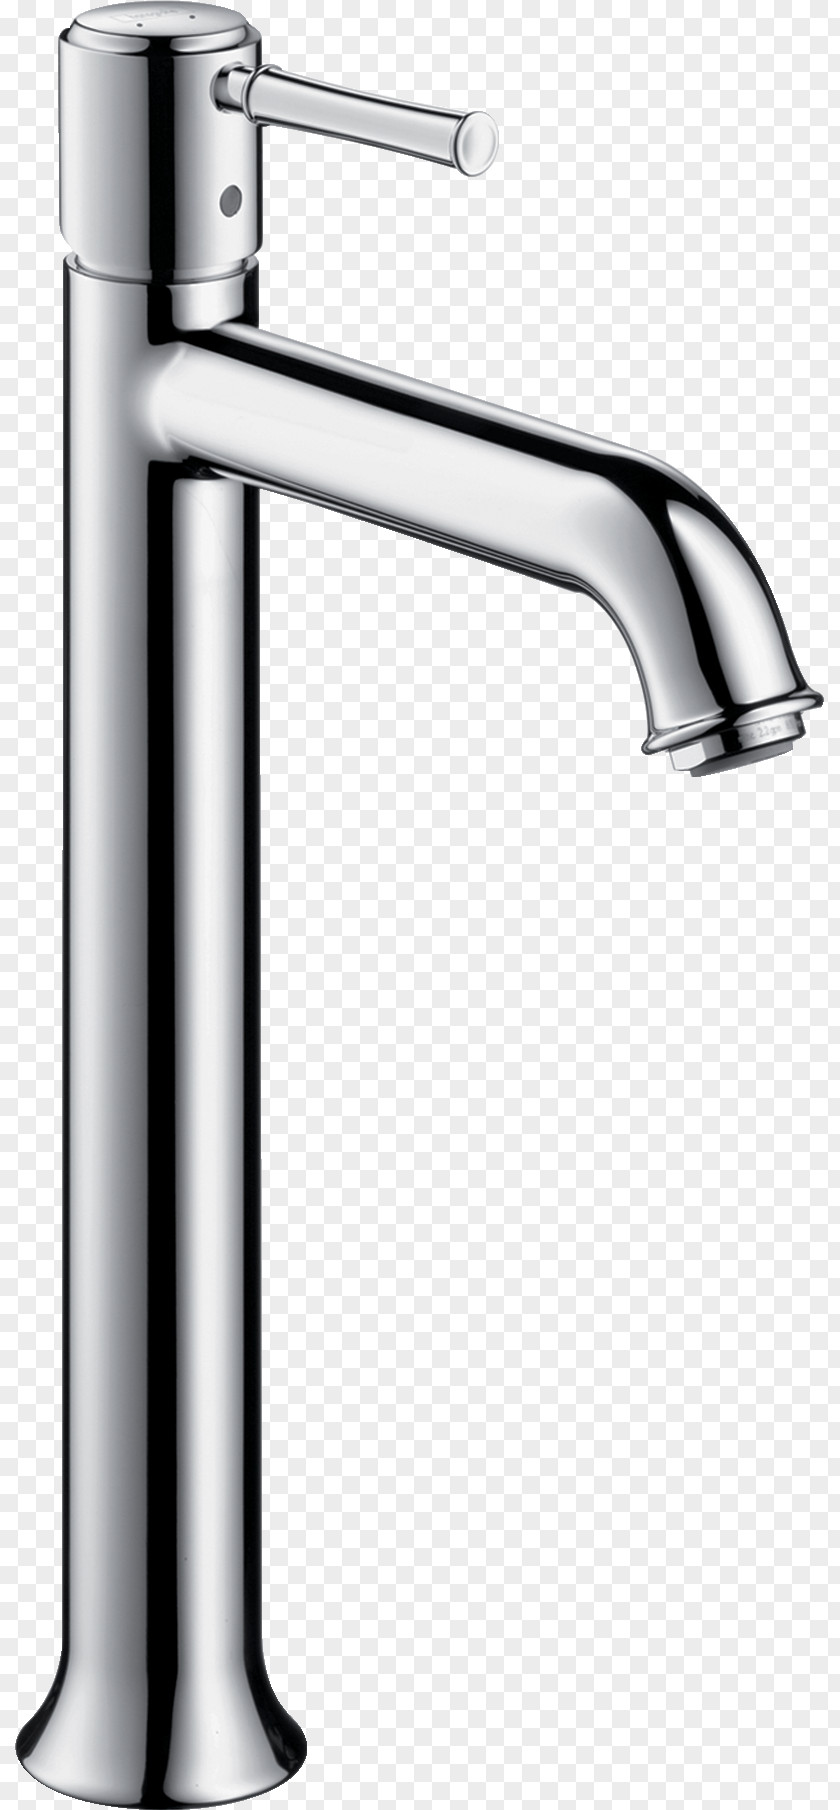 Sink Tap Hansgrohe Thermostatic Mixing Valve Bathroom PNG